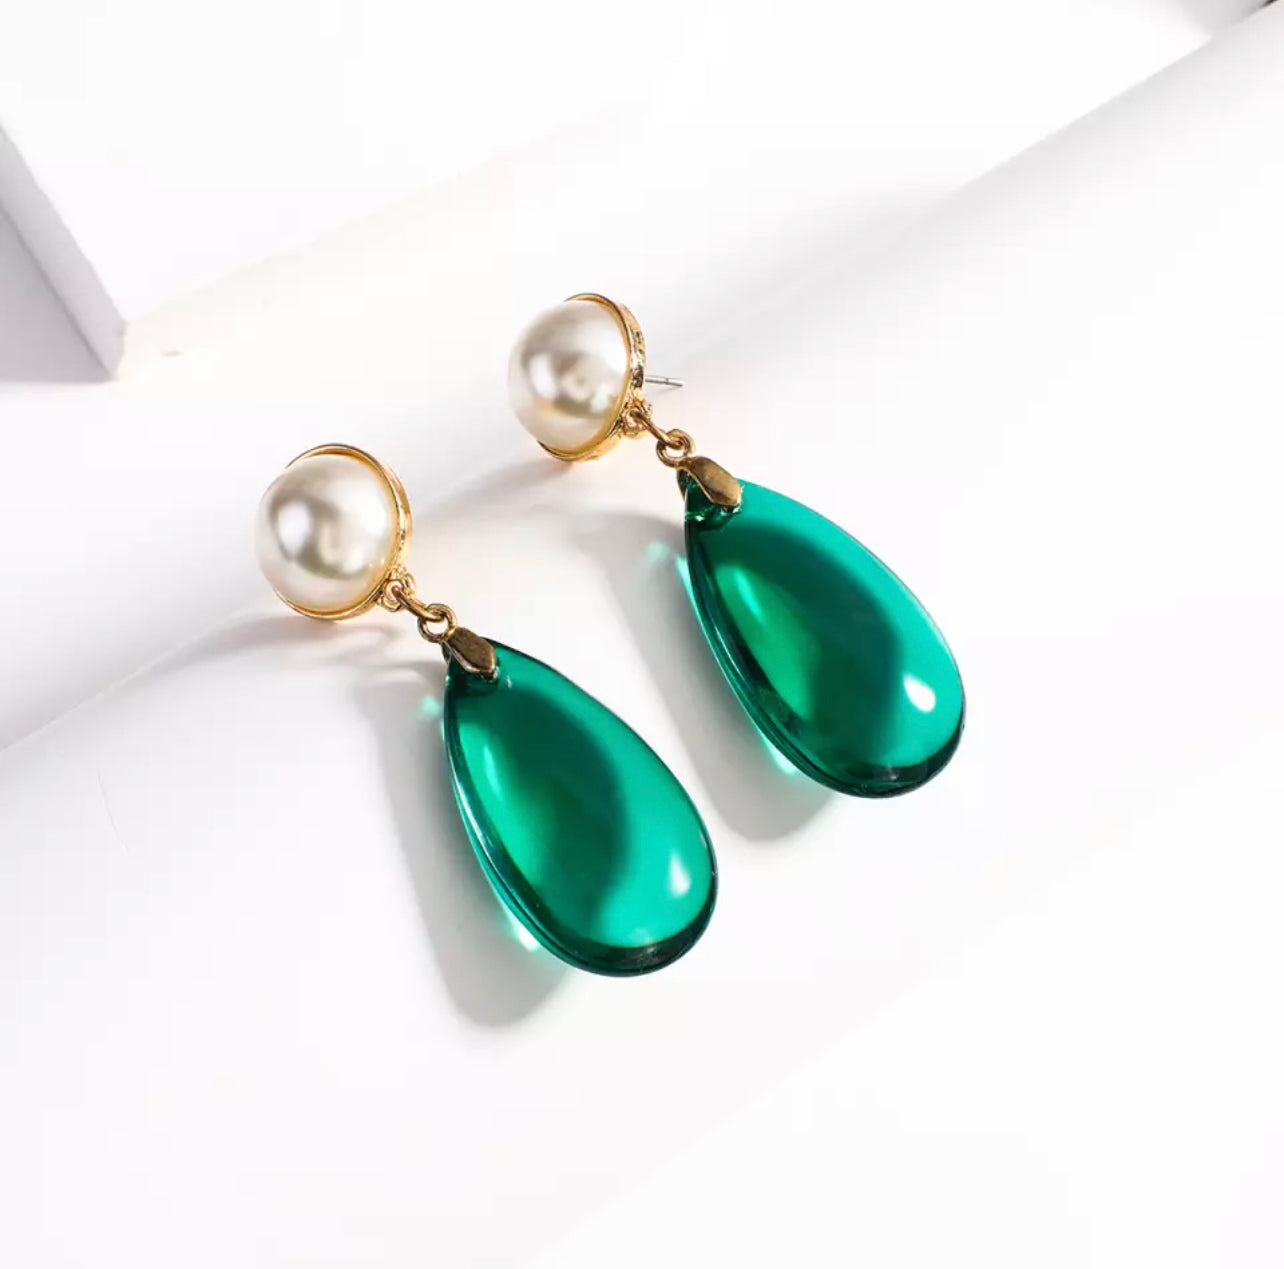 Green drop earrings with pearl studs